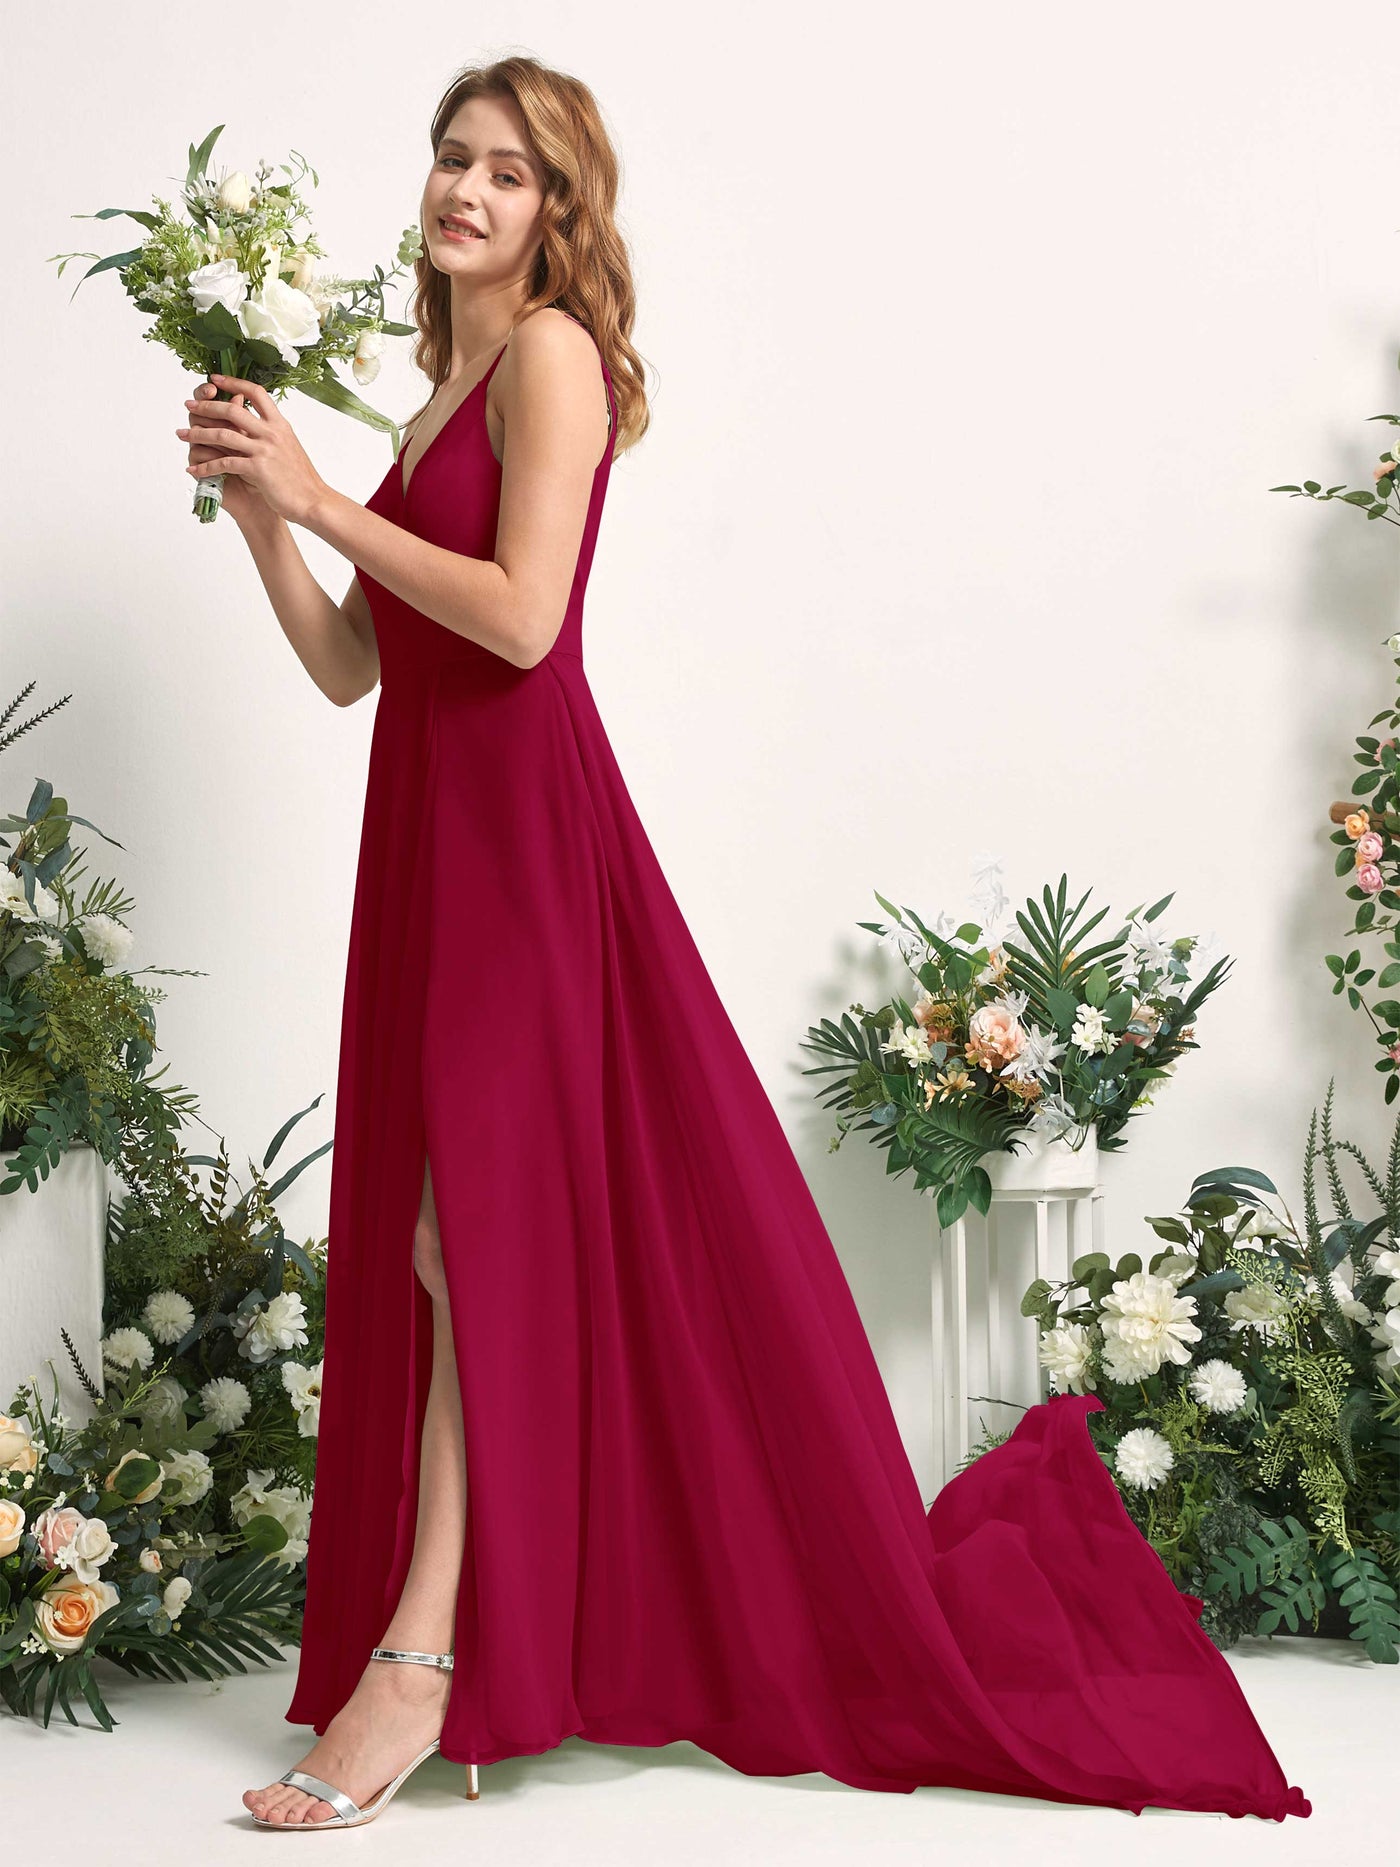 Bridesmaid Dress A-line Chiffon Spaghetti-straps Full Length Sleeveless Wedding Party Dress - Jester Red (81227741)#color_jester-red